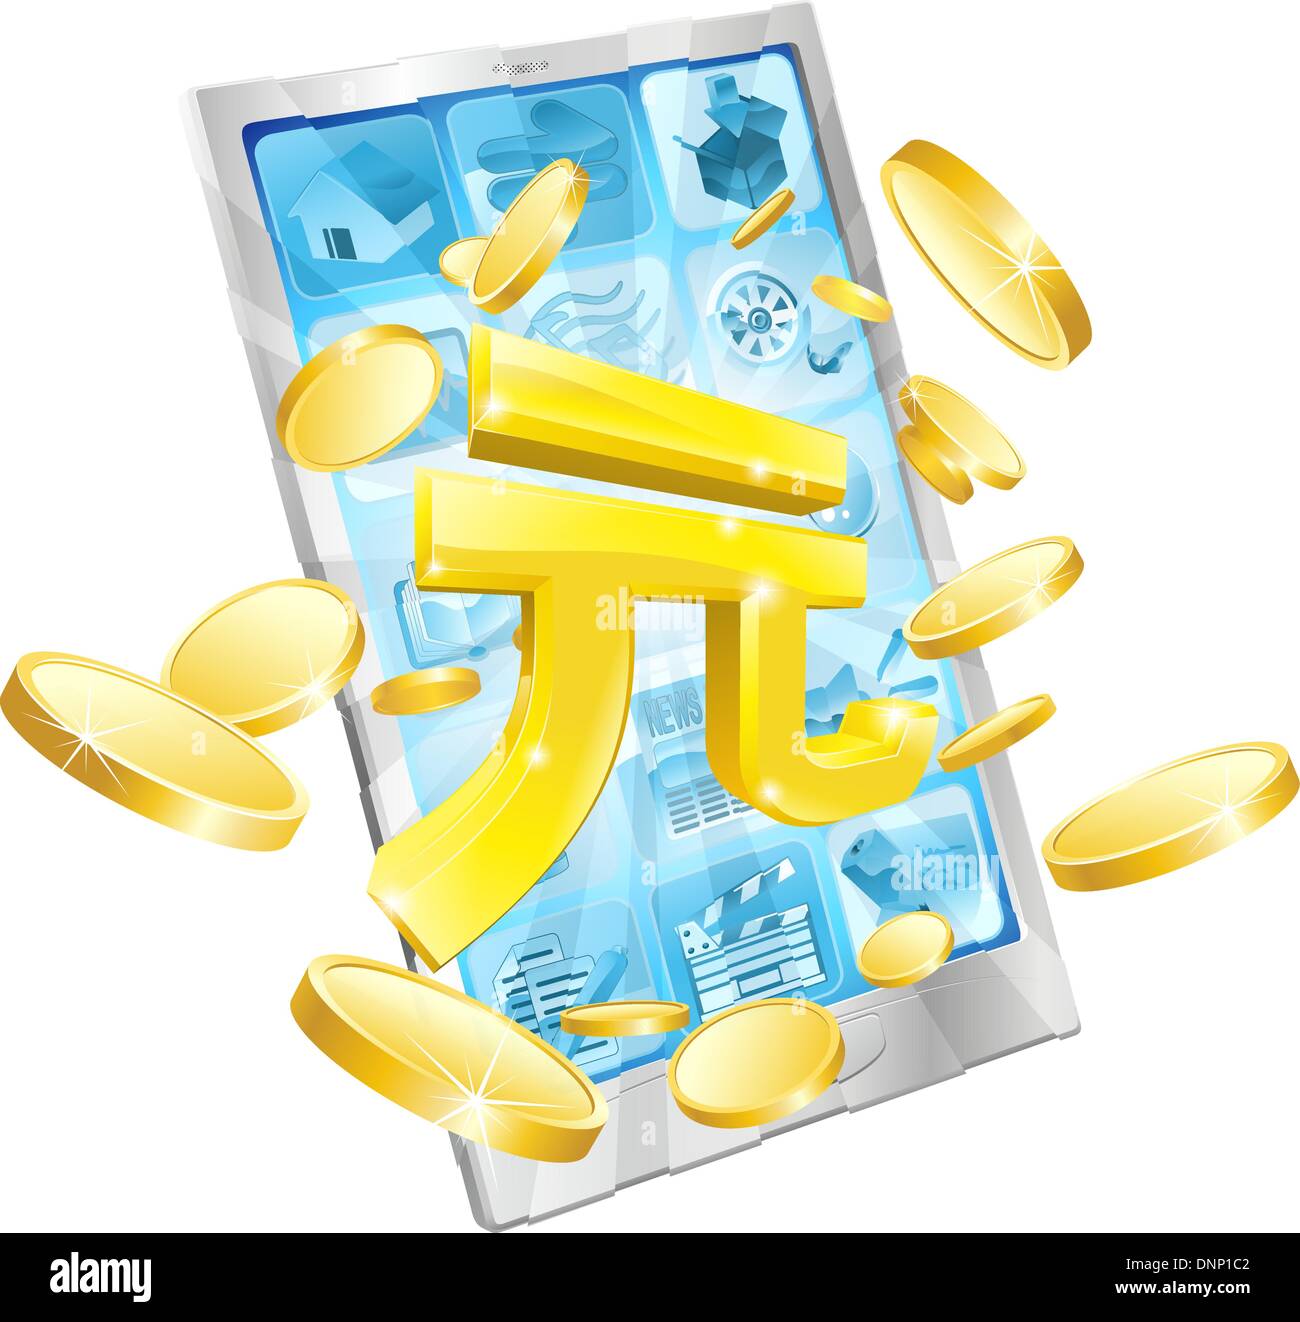 Yuan money phone concept illustration of mobile cell phone with gold Yuan sign and coins Stock Vector